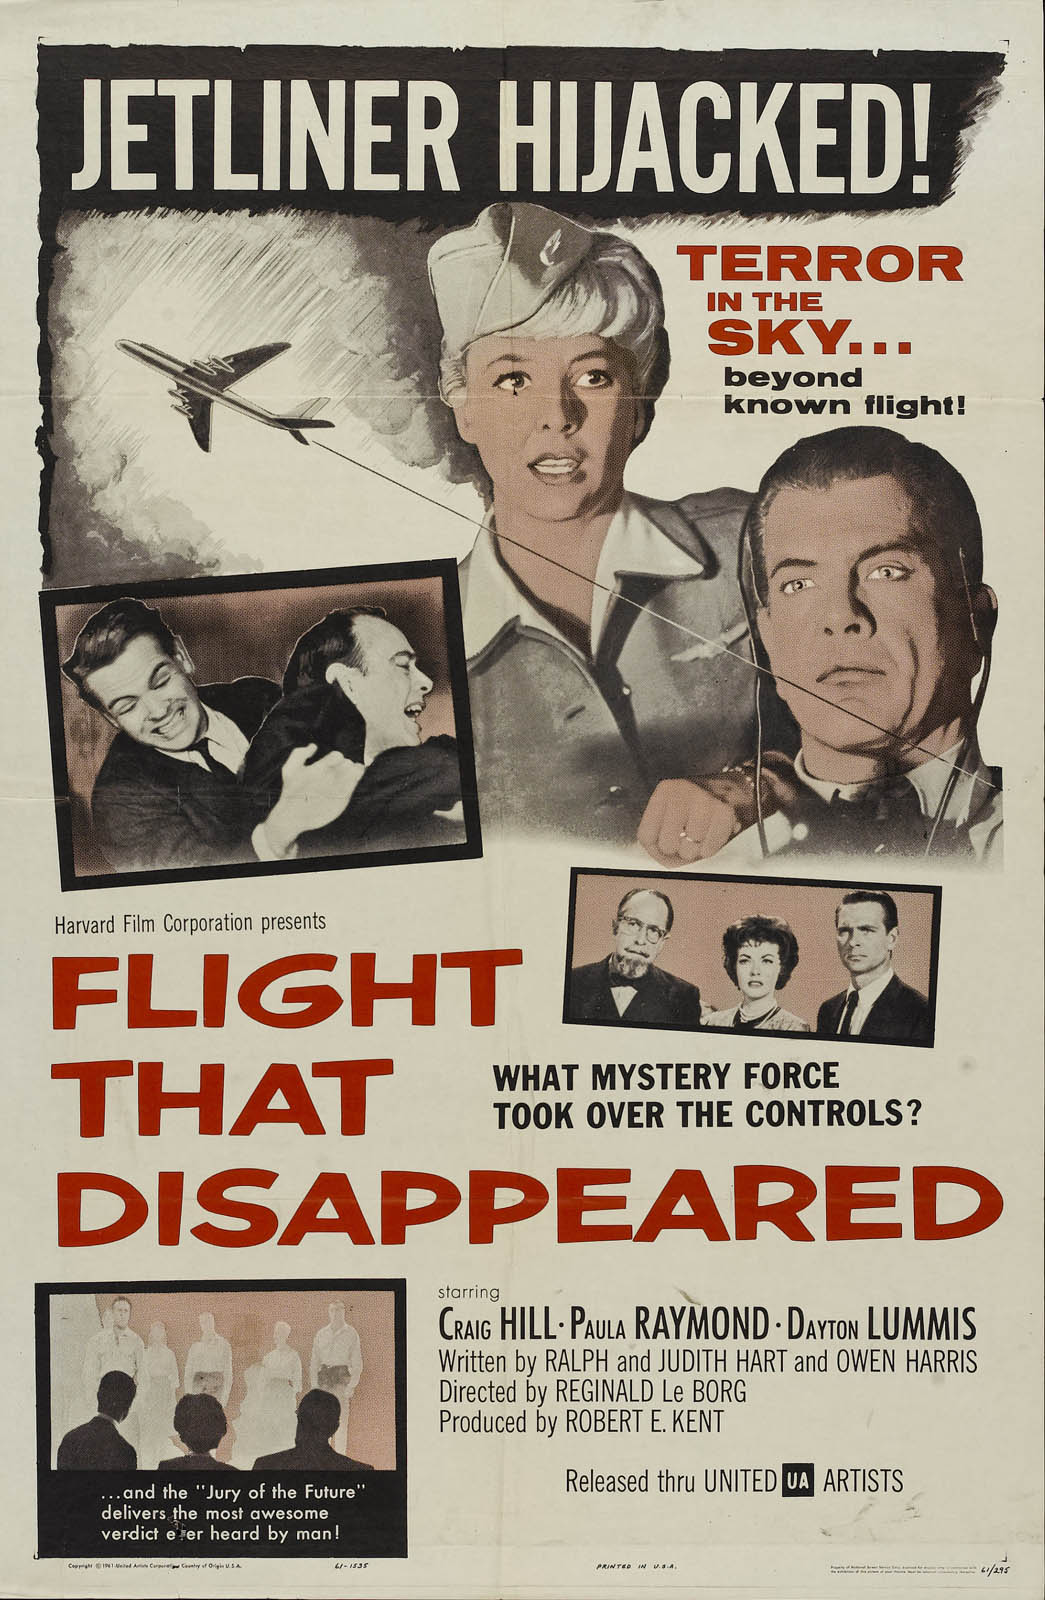 FLIGHT THAT DISAPPEARED, THE